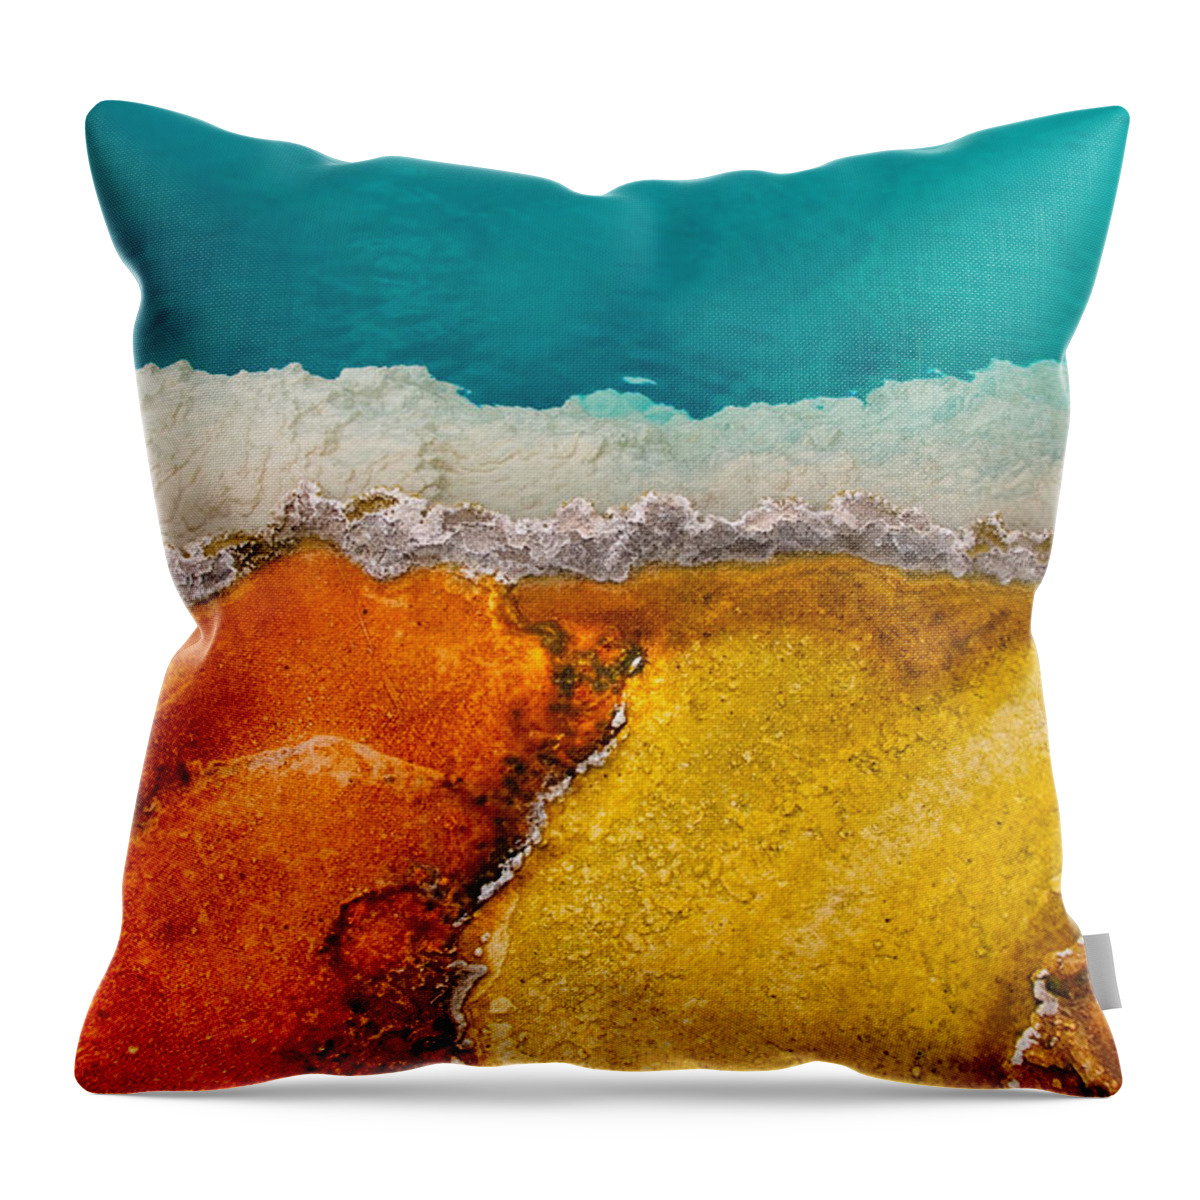 Pool Throw Pillow featuring the photograph Yellowstone Pool by Grant Groberg